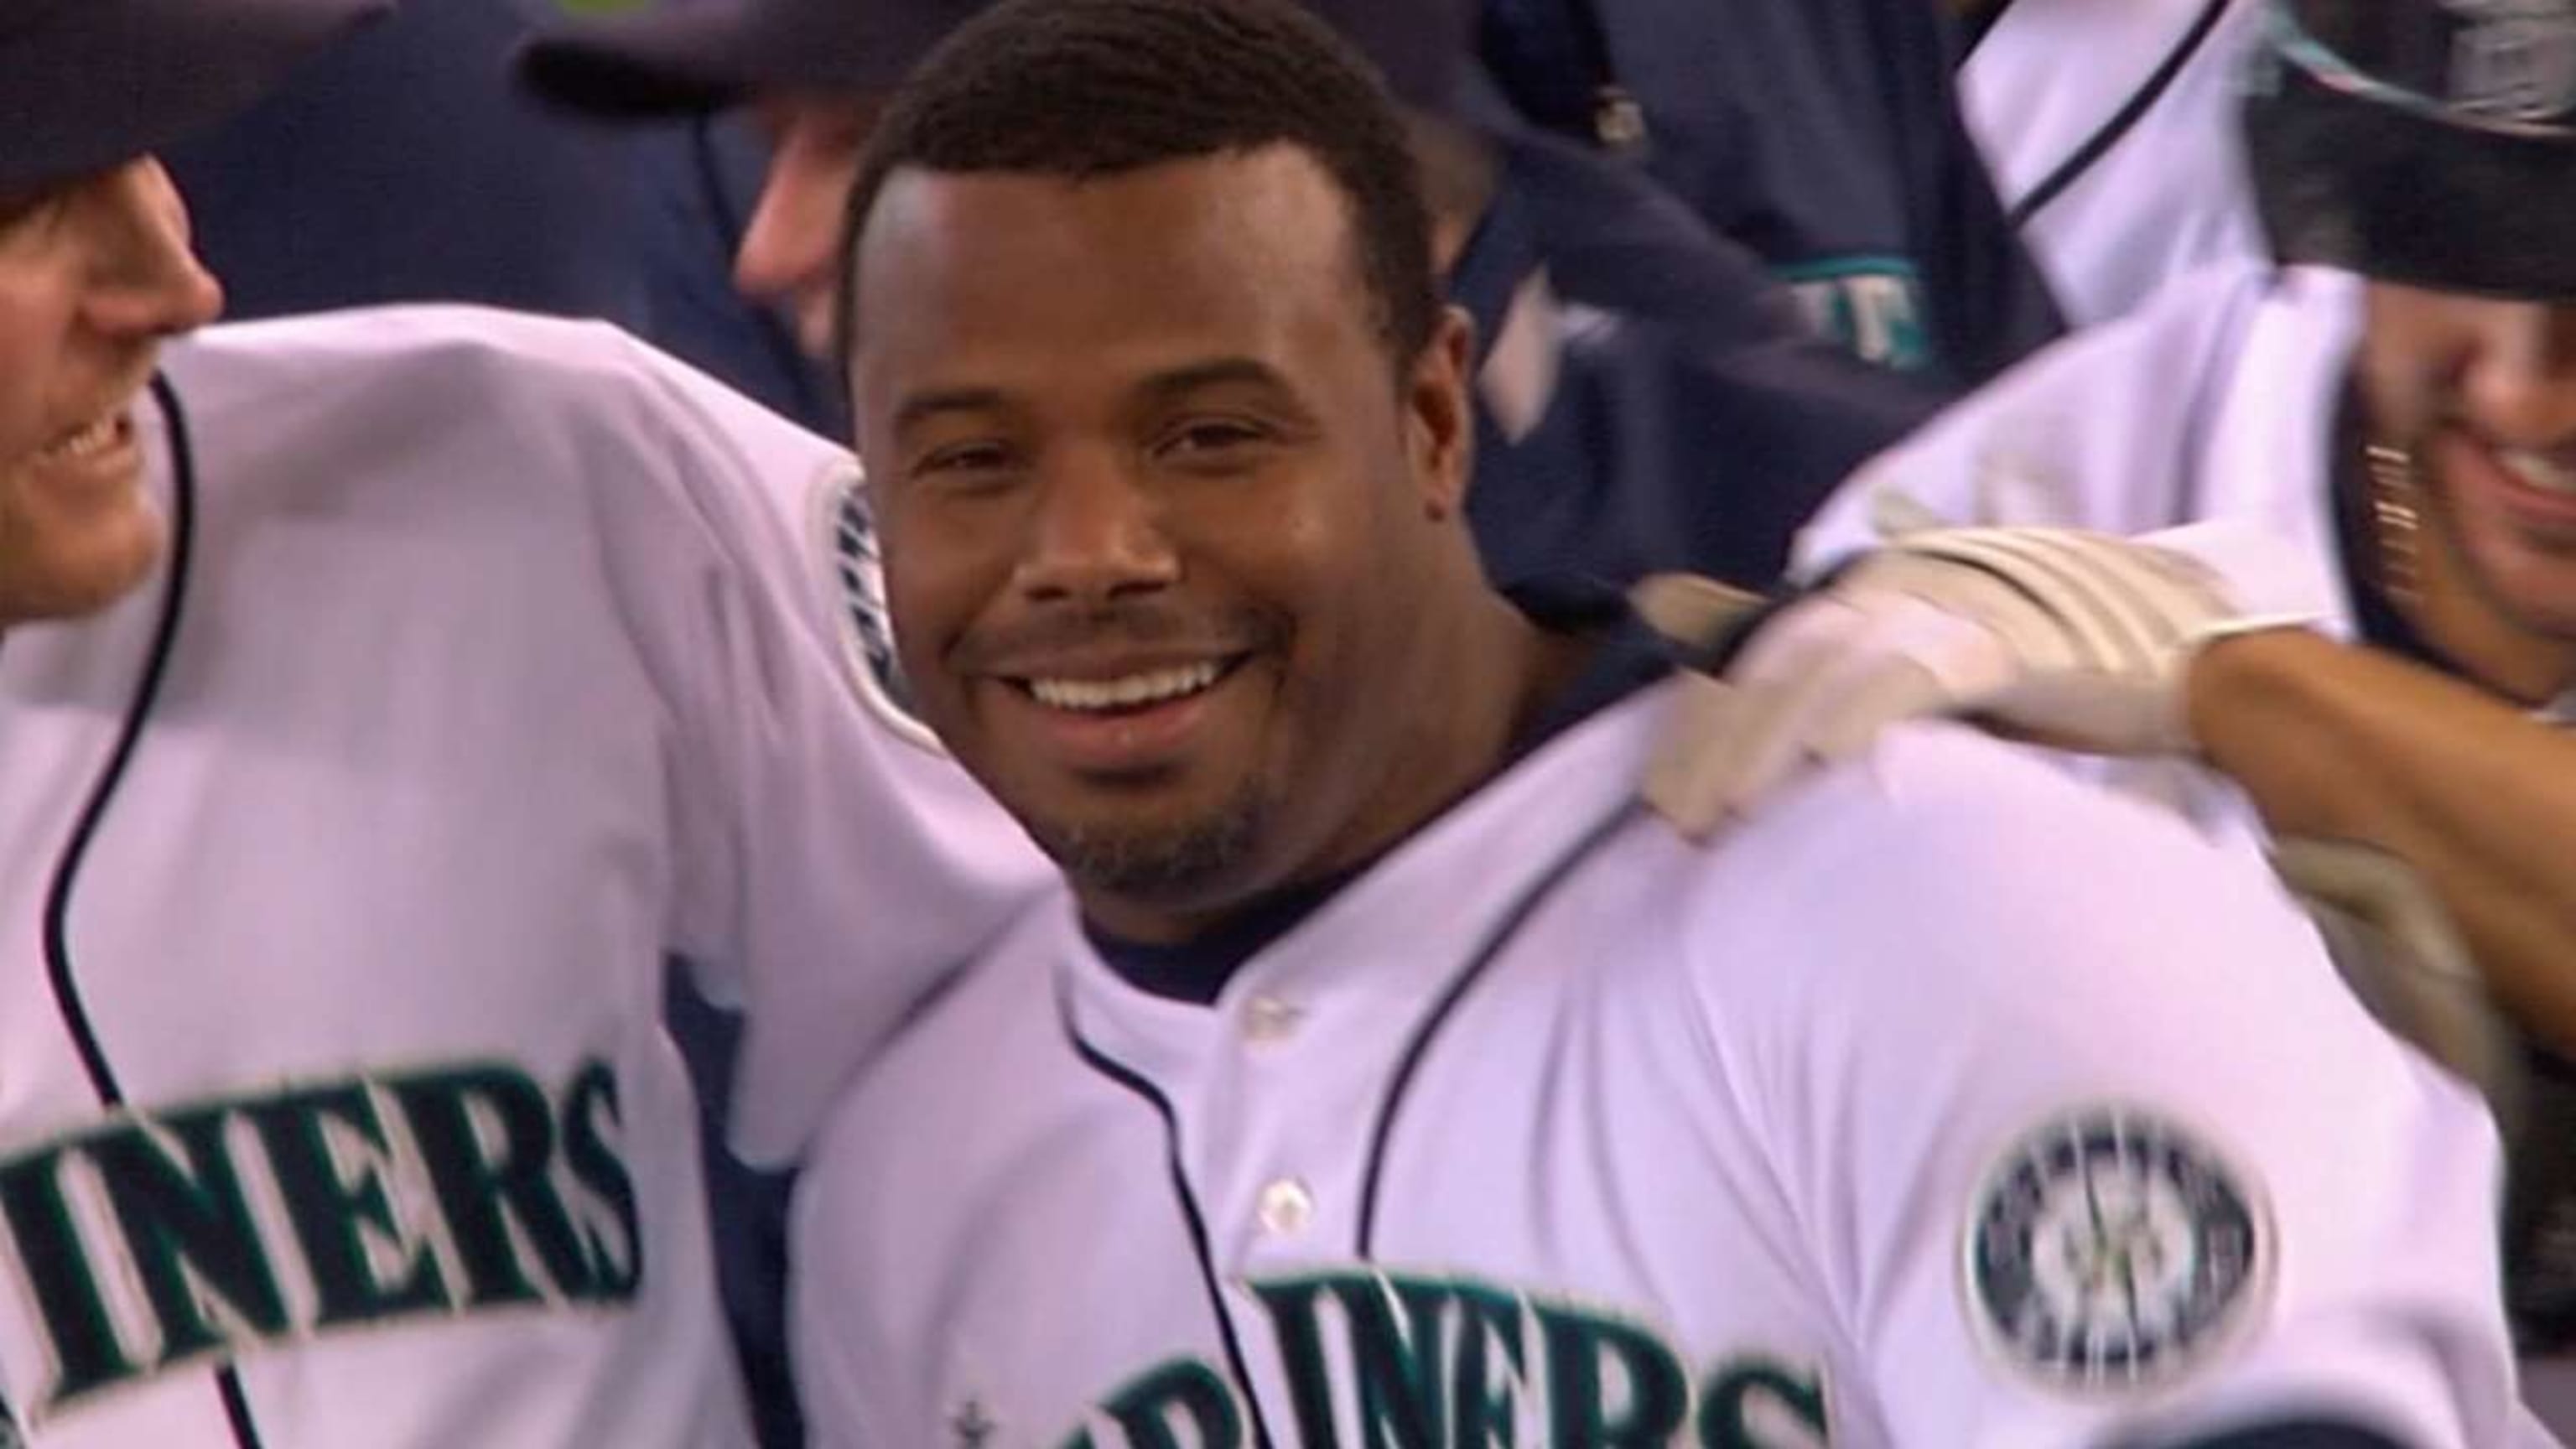 Remember Ken Griffey Jr.'s swing, style and smile with classic